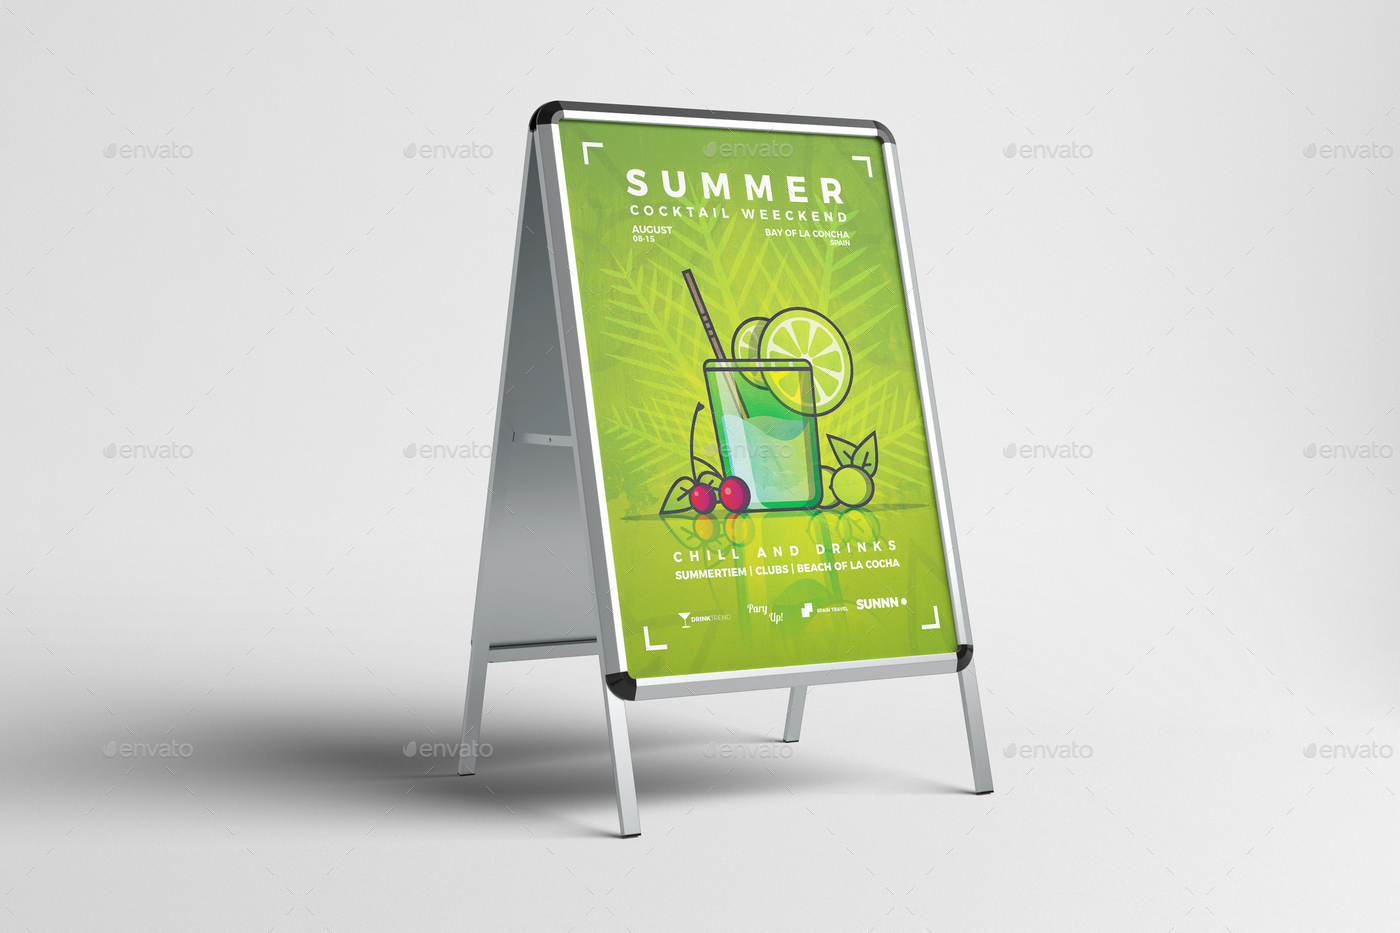 Download 49 Free Psd Billboard Banner Mockups For Creating The Best Advertisement And Premium Version Free Psd Templates PSD Mockup Templates